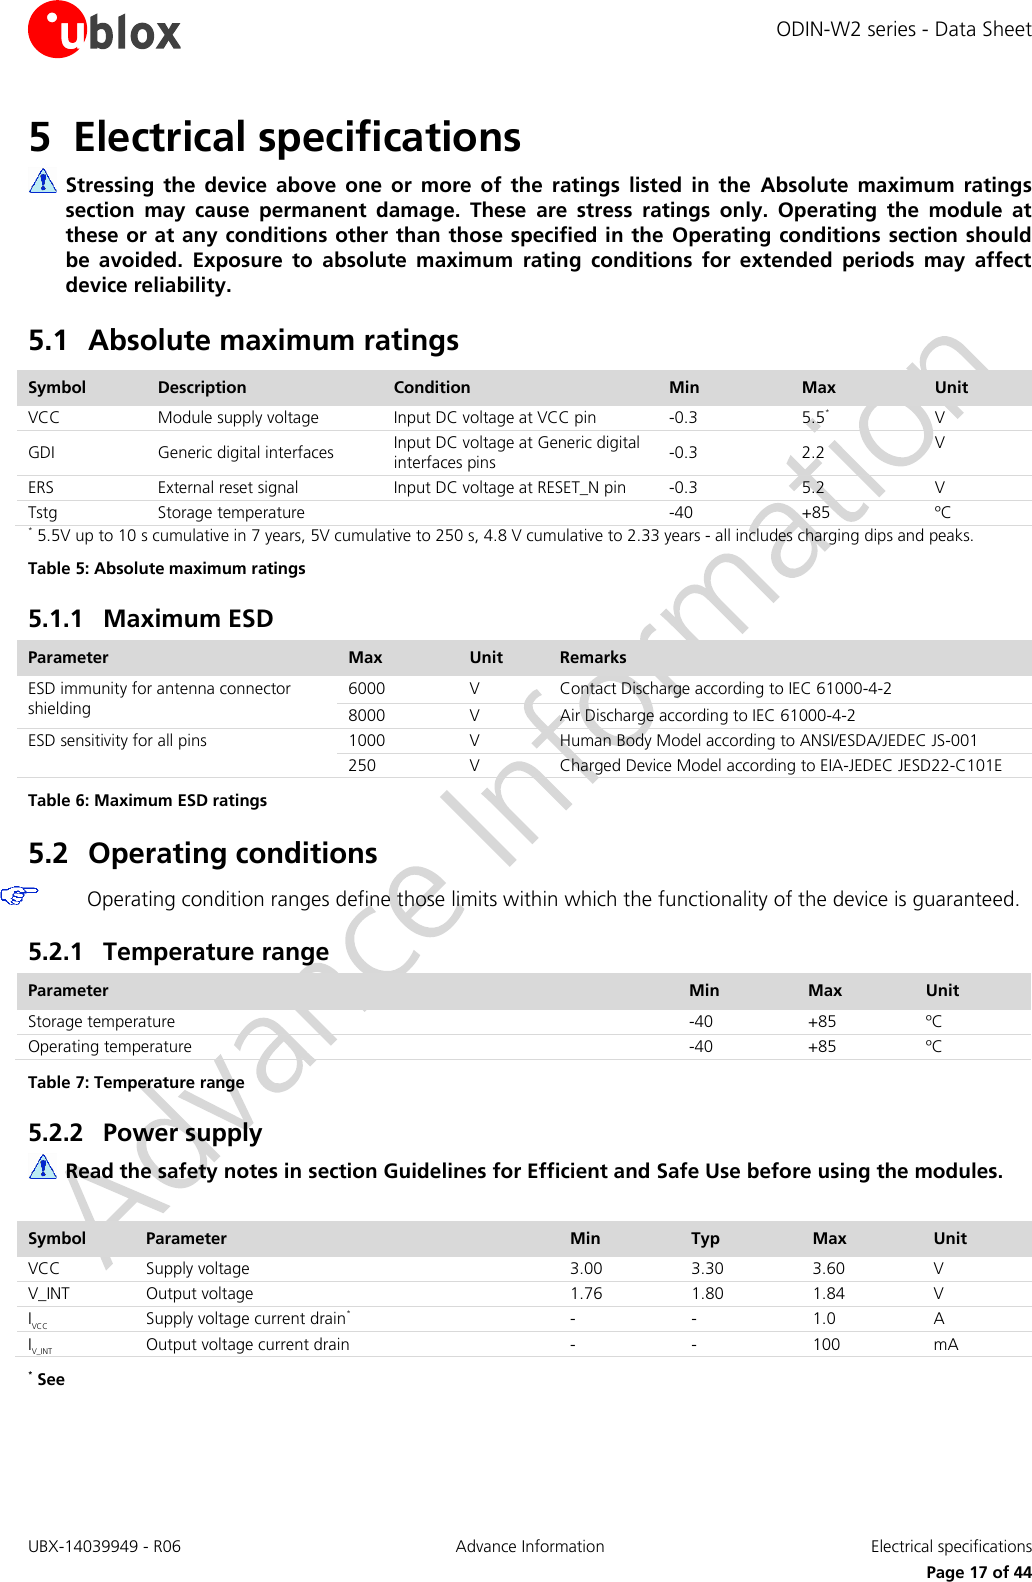 ODIN-W2 series - Data Sheet UBX-14039949 - R06 Advance Information  Electrical specifications     Page 17 of 44 5 Electrical specifications  Stressing  the  device  above  one  or  more  of  the  ratings  listed  in  the  Absolute  maximum  ratings section  may  cause  permanent  damage.  These  are  stress  ratings  only.  Operating  the  module  at these or at any conditions other than those specified in the  Operating conditions section should be  avoided.  Exposure  to  absolute  maximum  rating  conditions  for  extended  periods  may  affect device reliability. 5.1 Absolute maximum ratings Symbol Description Condition Min Max Unit VCC Module supply voltage Input DC voltage at VCC pin -0.3   5.5* V GDI Generic digital interfaces Input DC voltage at Generic digital interfaces pins -0.3 2.2 V ERS External reset signal Input DC voltage at RESET_N pin -0.3 5.2 V Tstg Storage temperature   -40 +85 ºC * 5.5V up to 10 s cumulative in 7 years, 5V cumulative to 250 s, 4.8 V cumulative to 2.33 years - all includes charging dips and peaks. Table 5: Absolute maximum ratings 5.1.1 Maximum ESD Parameter Max Unit Remarks ESD immunity for antenna connector shielding 6000   V Contact Discharge according to IEC 61000-4-2 8000 V Air Discharge according to IEC 61000-4-2 ESD sensitivity for all pins  1000 V Human Body Model according to ANSI/ESDA/JEDEC JS-001 250 V Charged Device Model according to EIA-JEDEC JESD22-C101E Table 6: Maximum ESD ratings 5.2 Operating conditions  Operating condition ranges define those limits within which the functionality of the device is guaranteed. 5.2.1 Temperature range Parameter Min Max Unit Storage temperature -40 +85 ºC Operating temperature -40 +85 ºC Table 7: Temperature range 5.2.2 Power supply  Read the safety notes in section Guidelines for Efficient and Safe Use before using the modules.  Symbol Parameter Min Typ Max Unit VCC Supply voltage 3.00 3.30 3.60 V V_INT Output voltage 1.76 1.80 1.84 V IVCC Supply voltage current drain* - -  1.0 A IV_INT Output voltage current drain - - 100 mA * See    